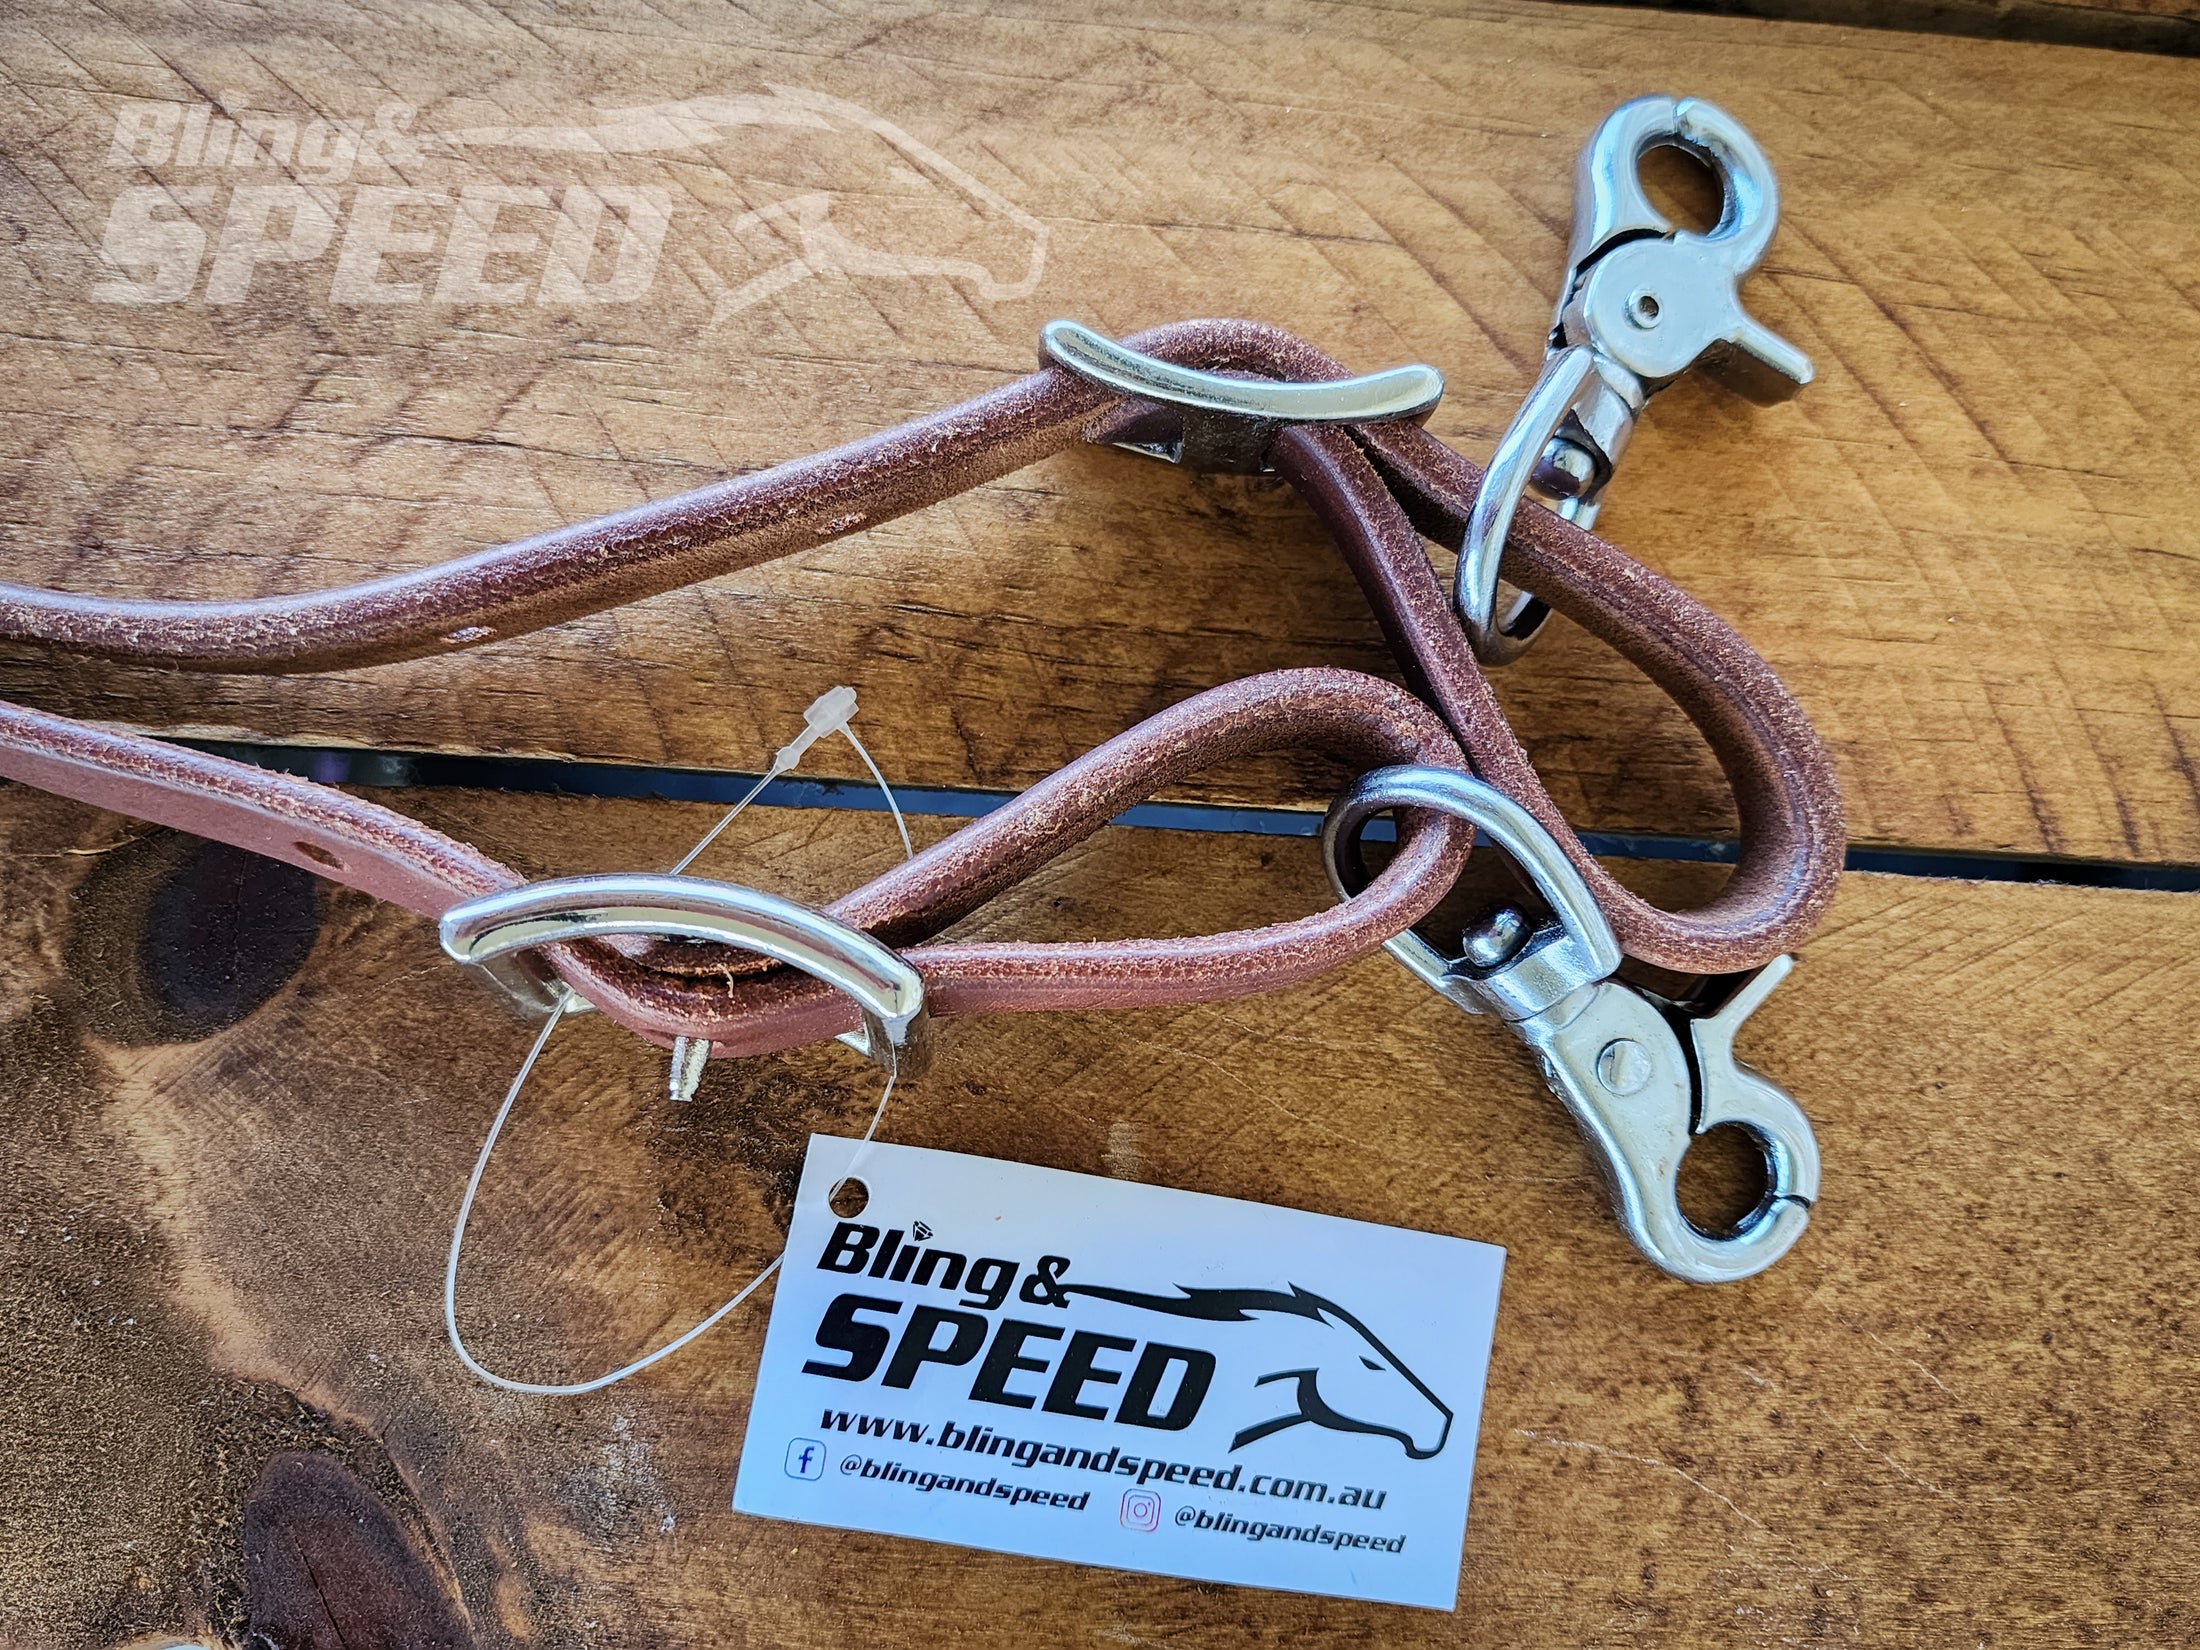 Bling & Speed Twisted Bloodknot Buckstitched Barrel Reins - Silver (7977760522478)